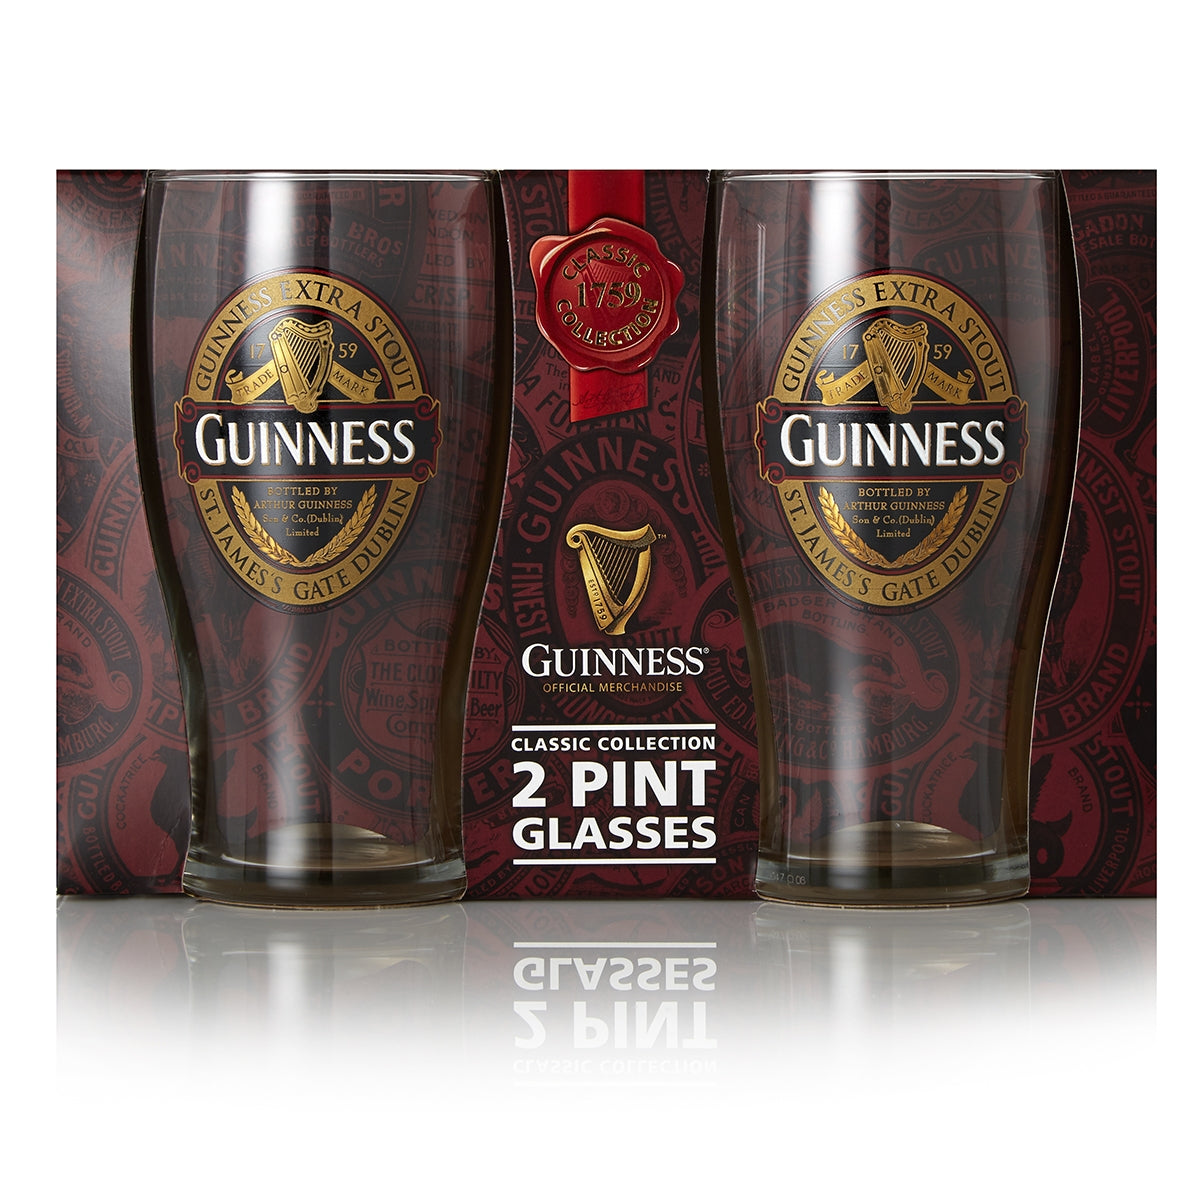 Two Guinness Classic Pint Glass Twin Packs in official merchandise packaging.